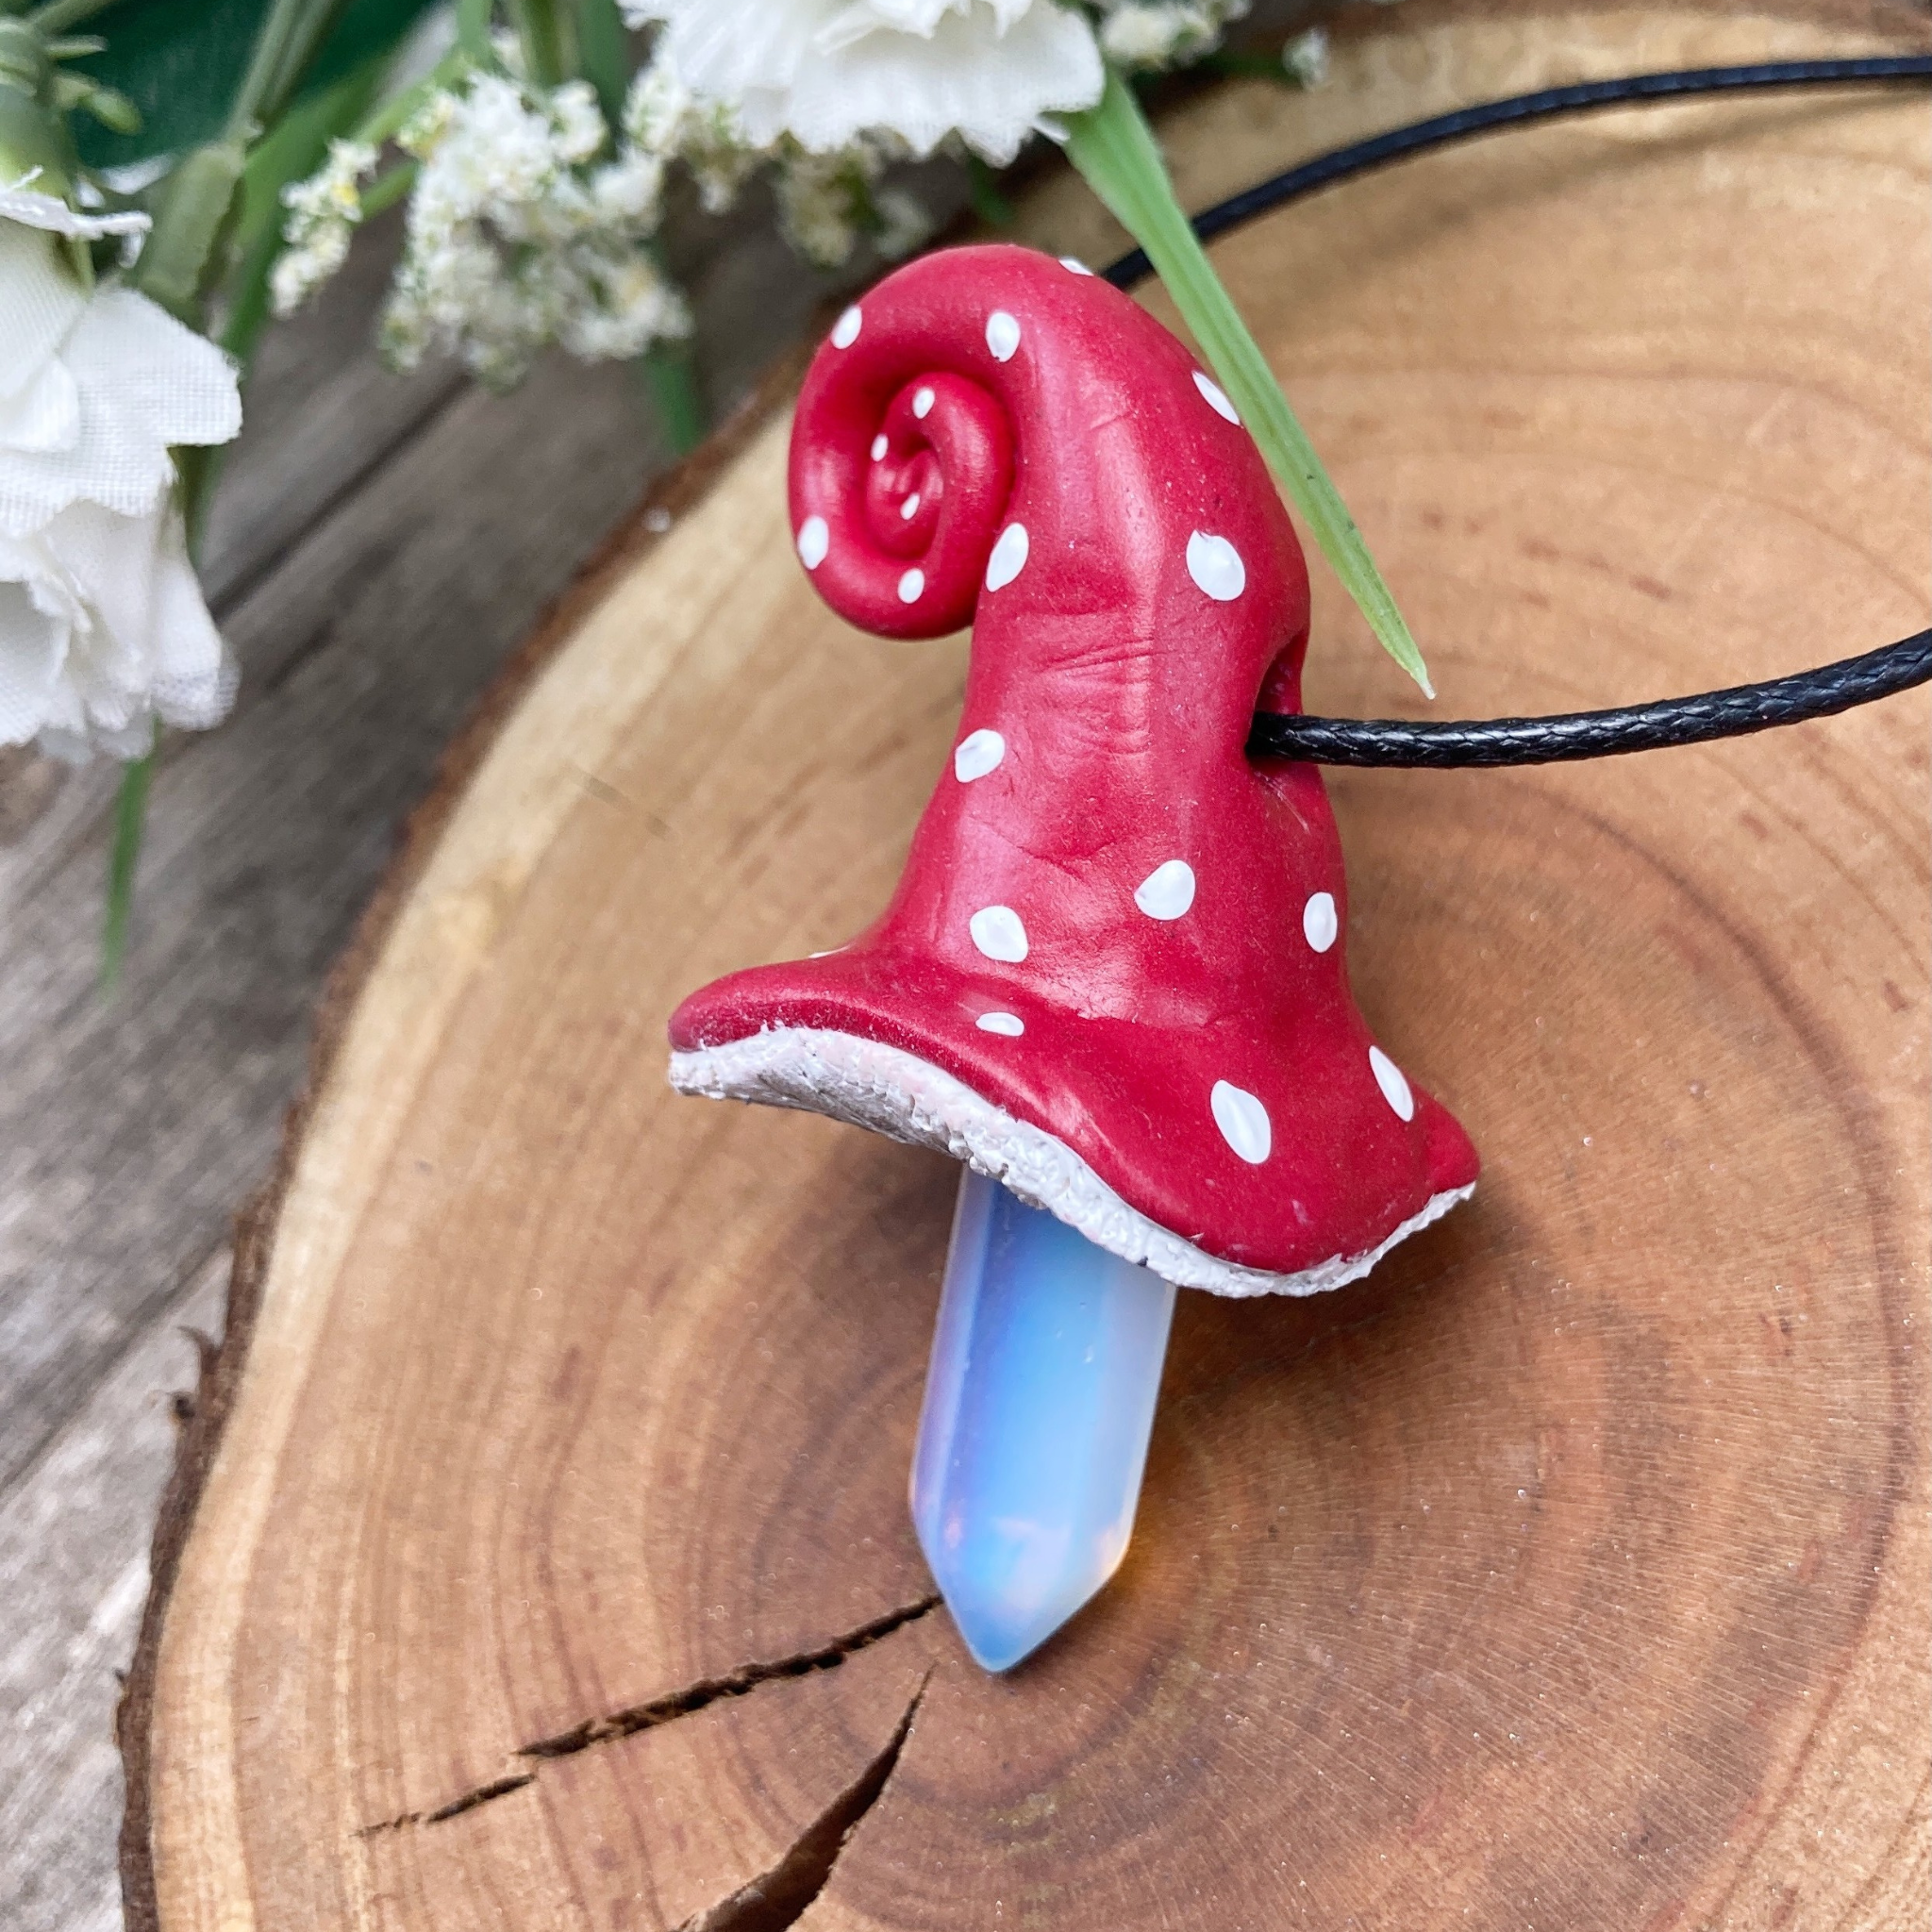 Stainless Steel Mushroom Pendant With Carved Gemstones Healing Crystals For  Womens Figurine Mushroom Necklace Jewelry From Mkny, $0.56 | DHgate.Com